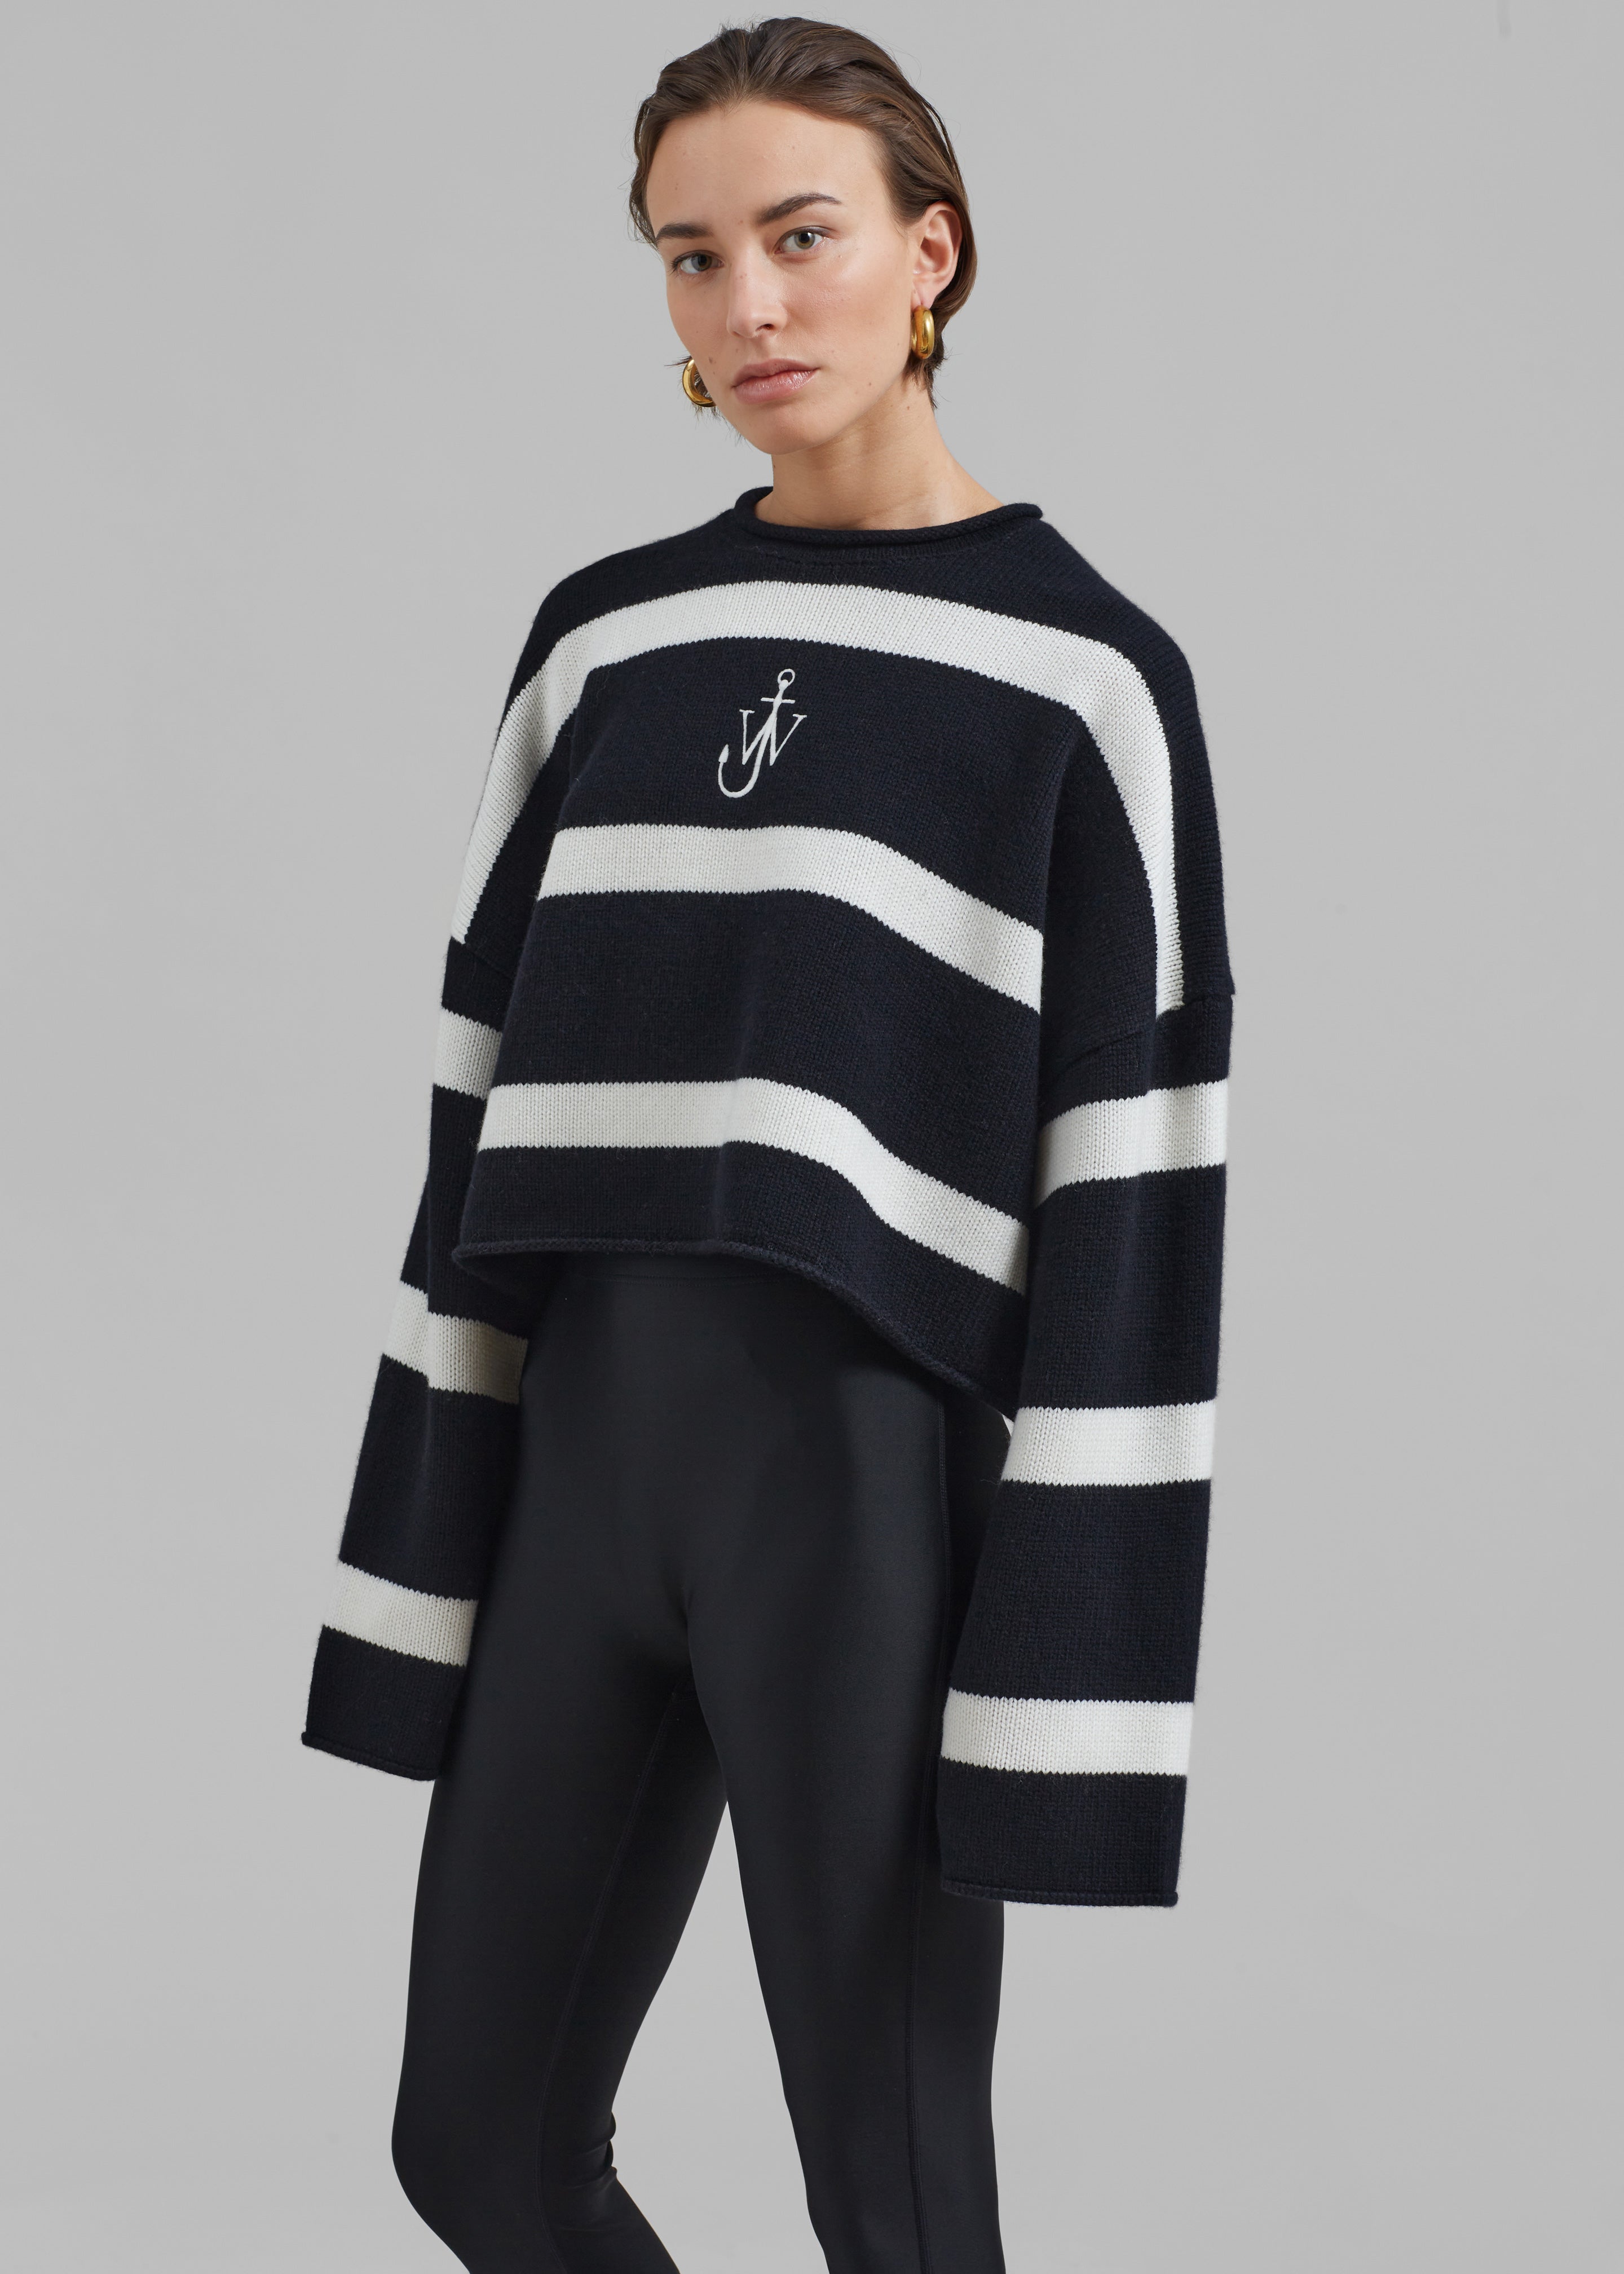 JW Anderson Cropped Anchor Jumper - Black/White - 1